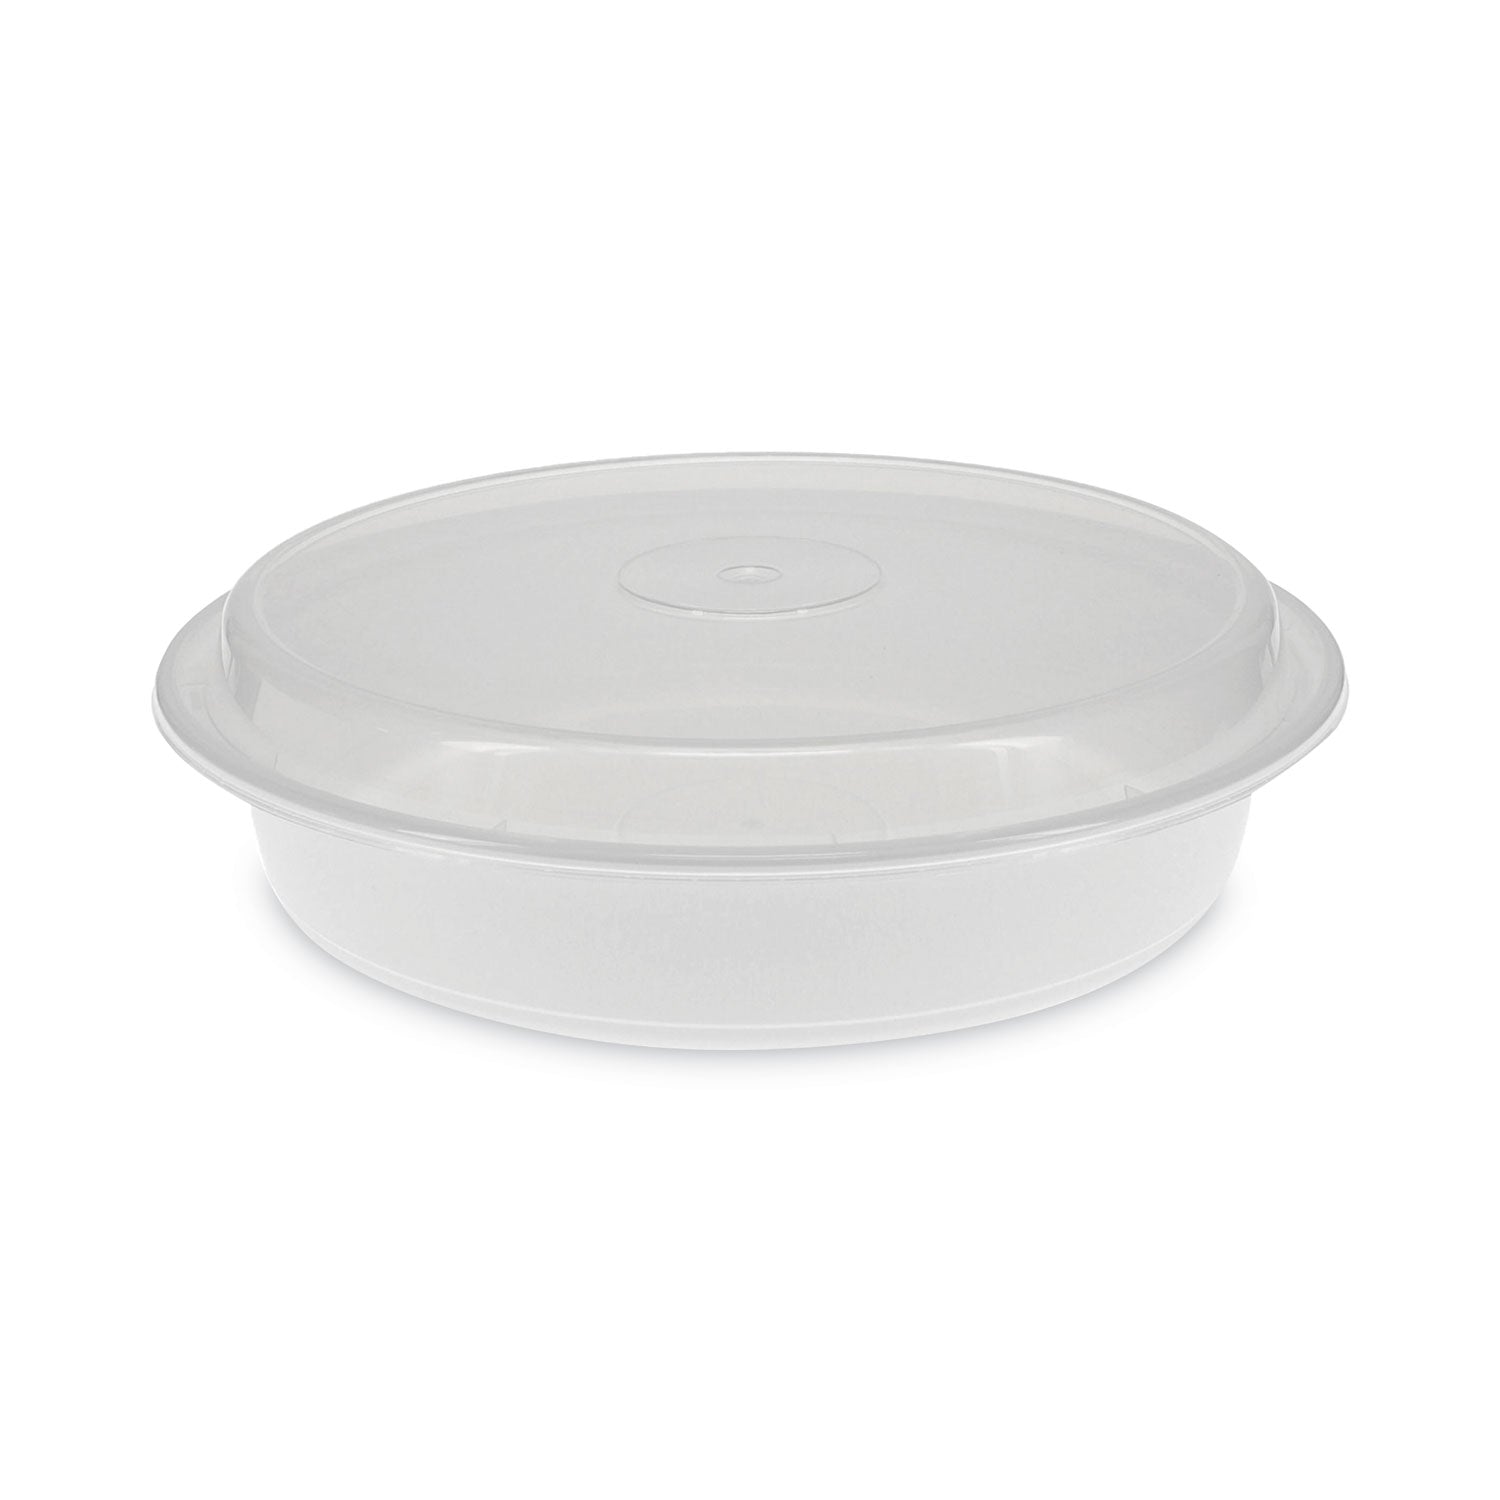 newspring-versatainer-microwavable-containers-48-oz-9-x-9-x-238-white-clear-plastic-150-carton_pctnc948 - 1